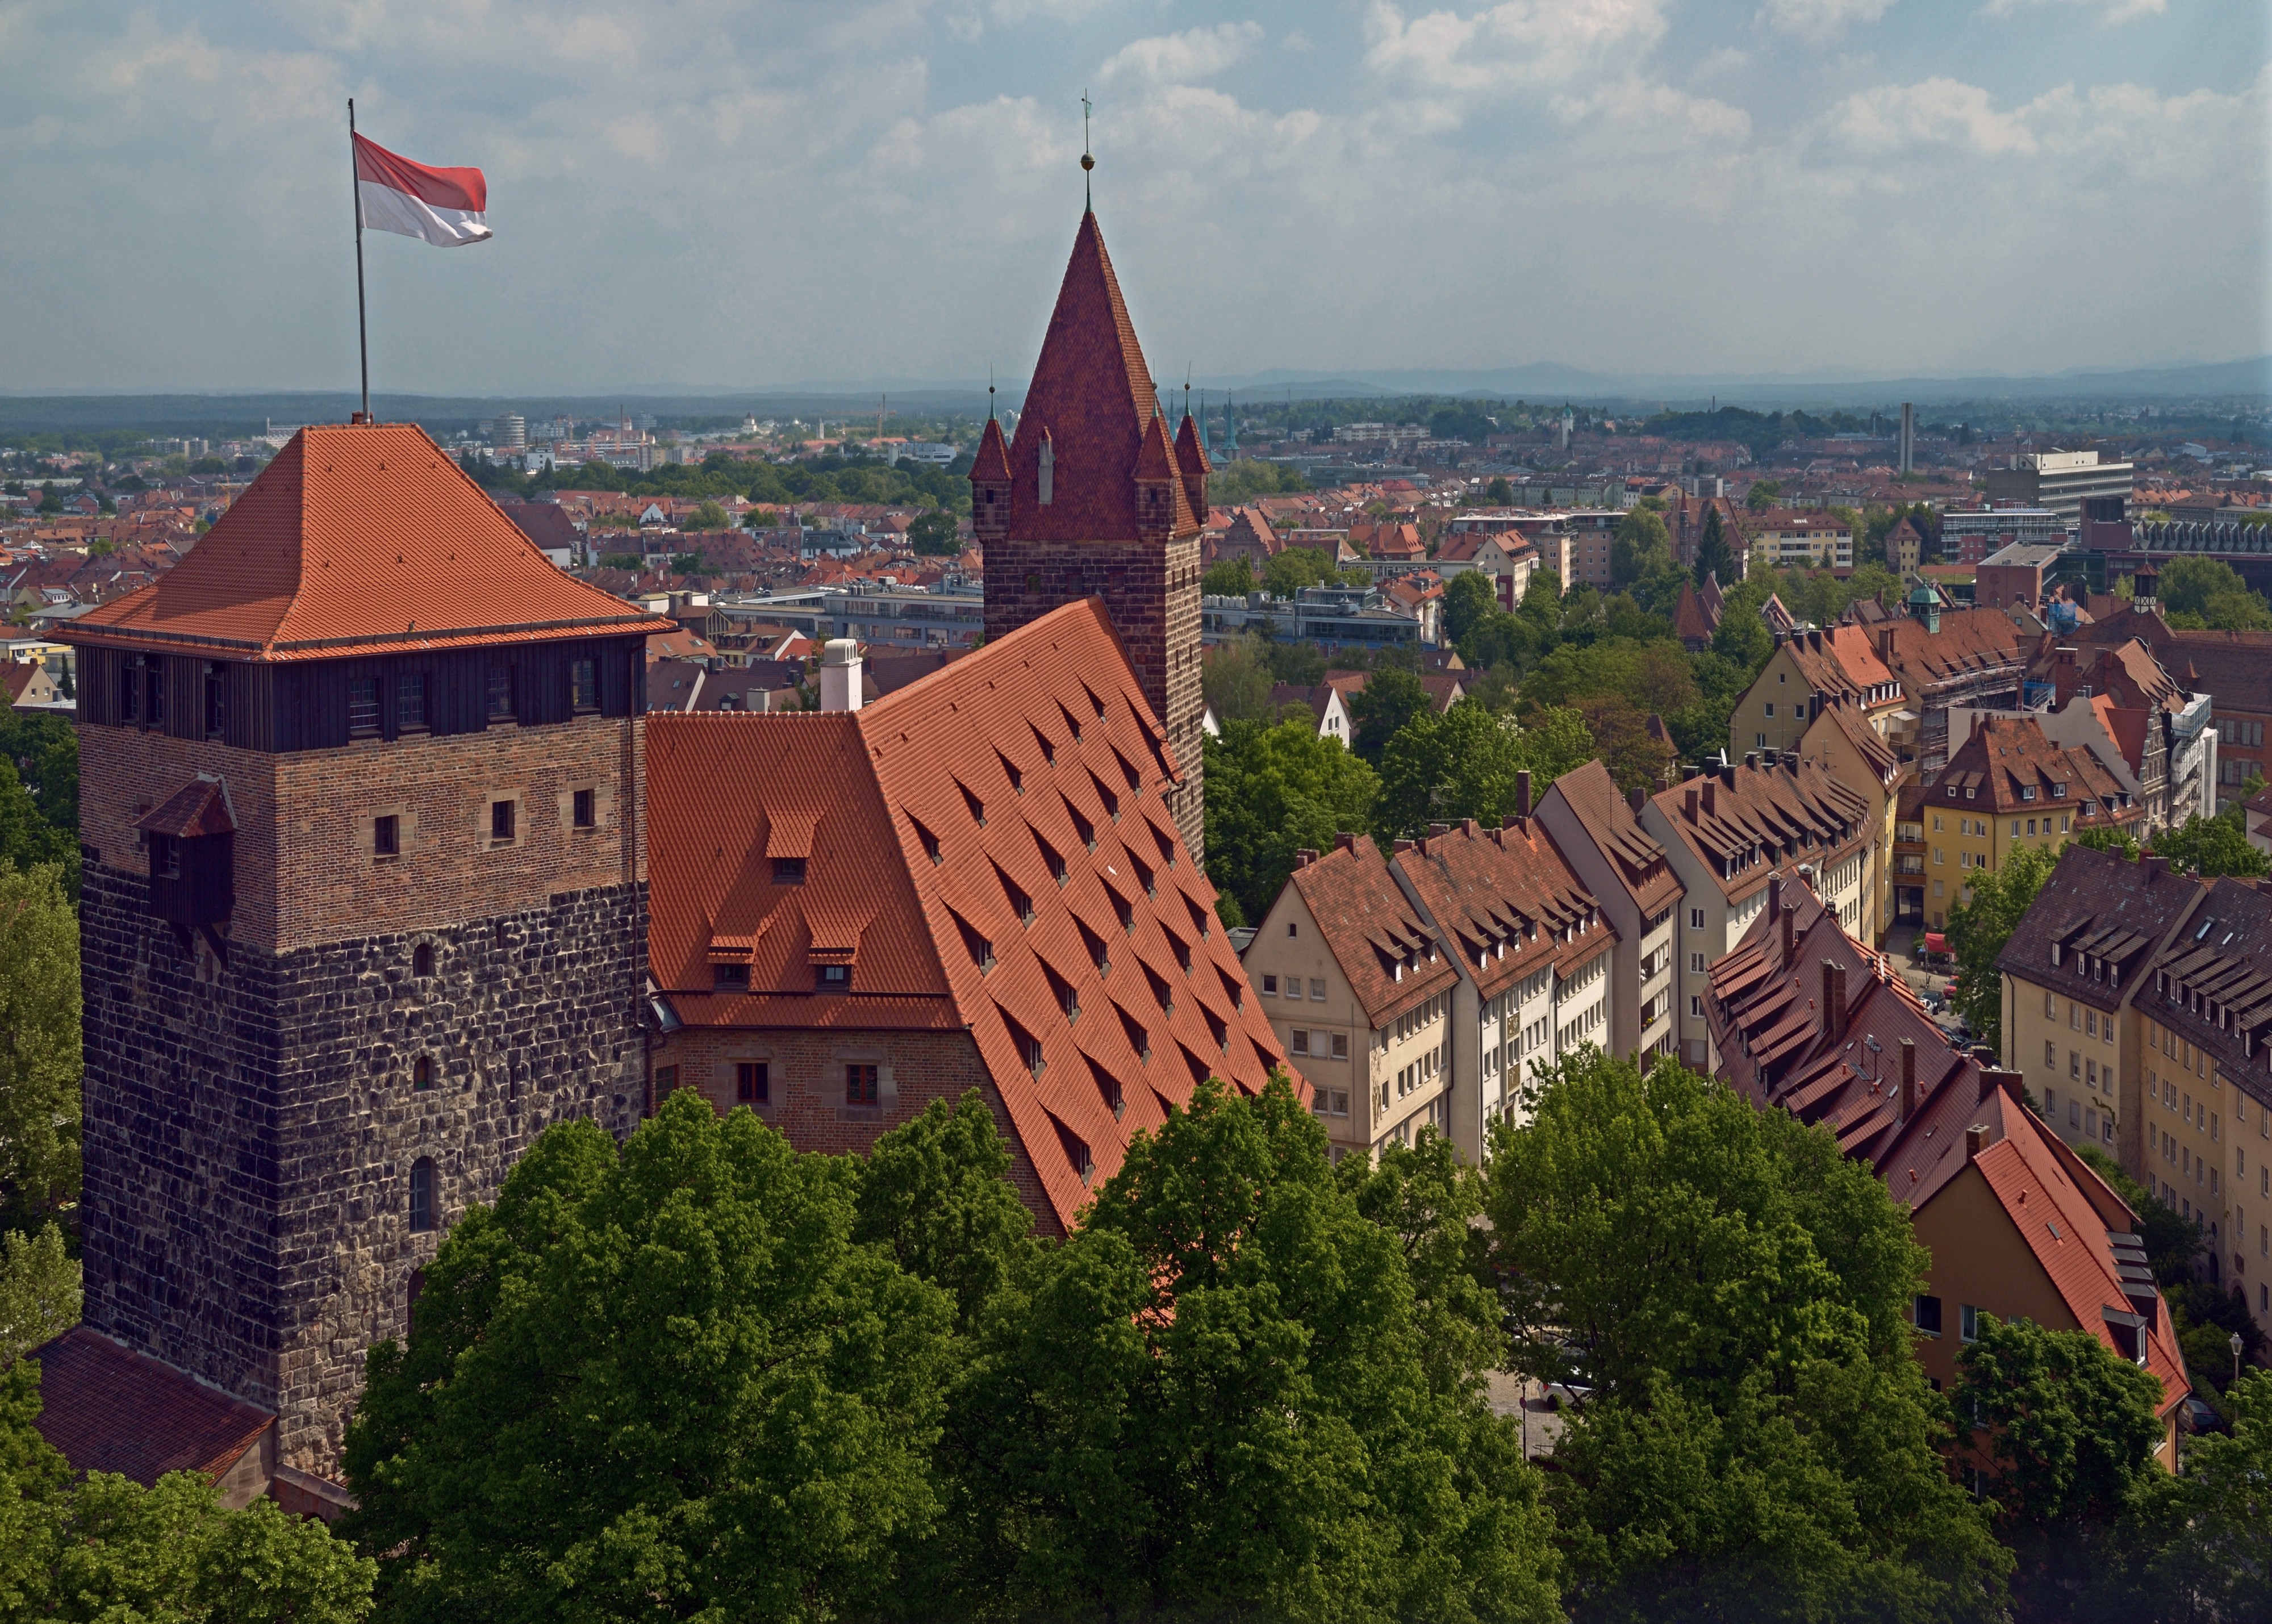 View of the Pentagonal tower, the Imperial Stables and Luginsland from the Nuremberg Castle. Germany